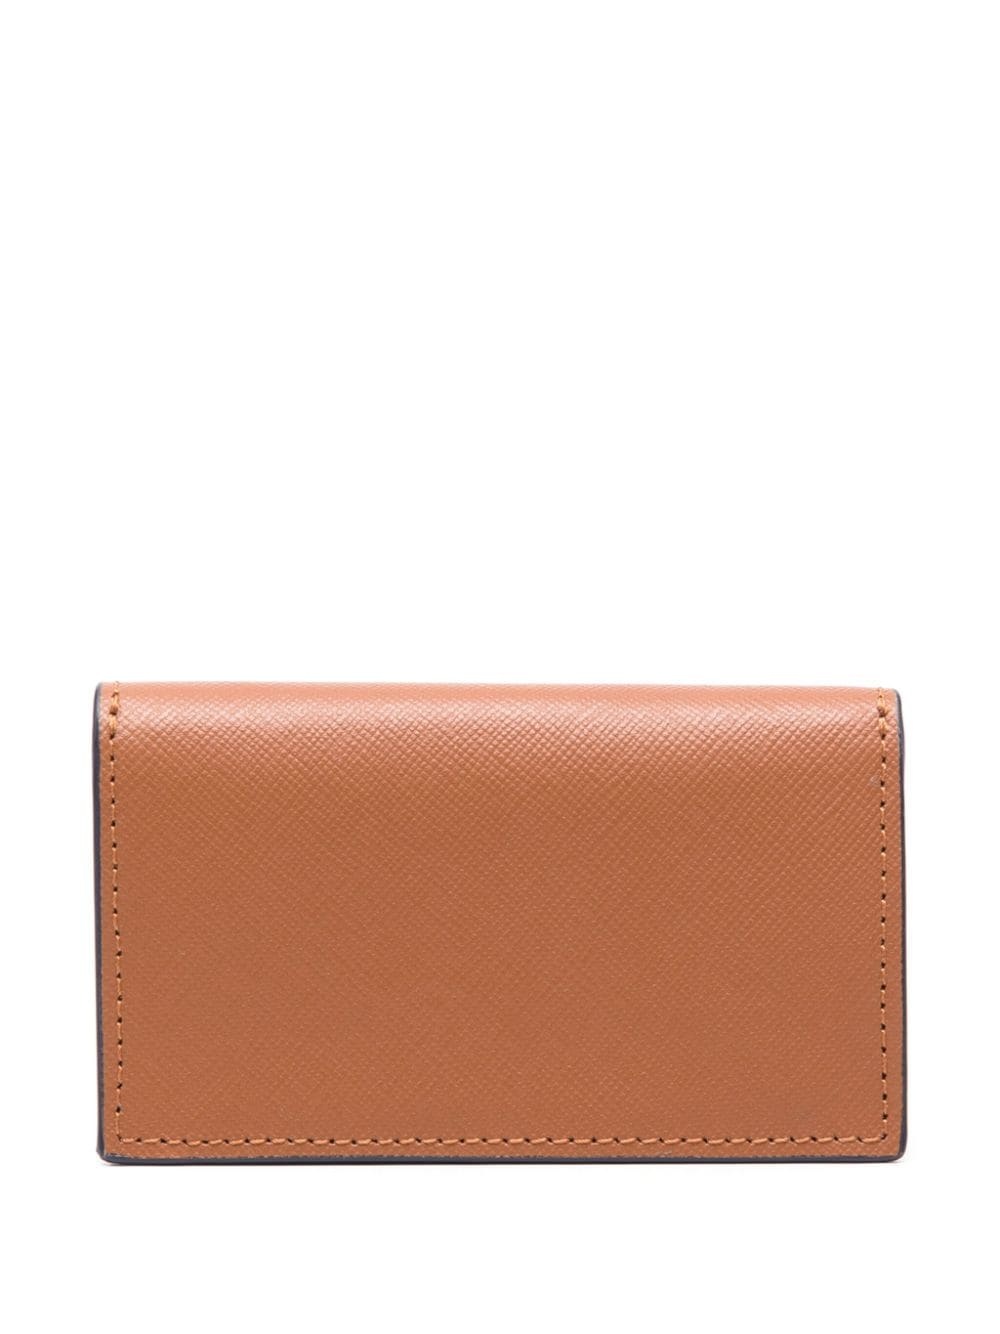 Business leather wallet - 2